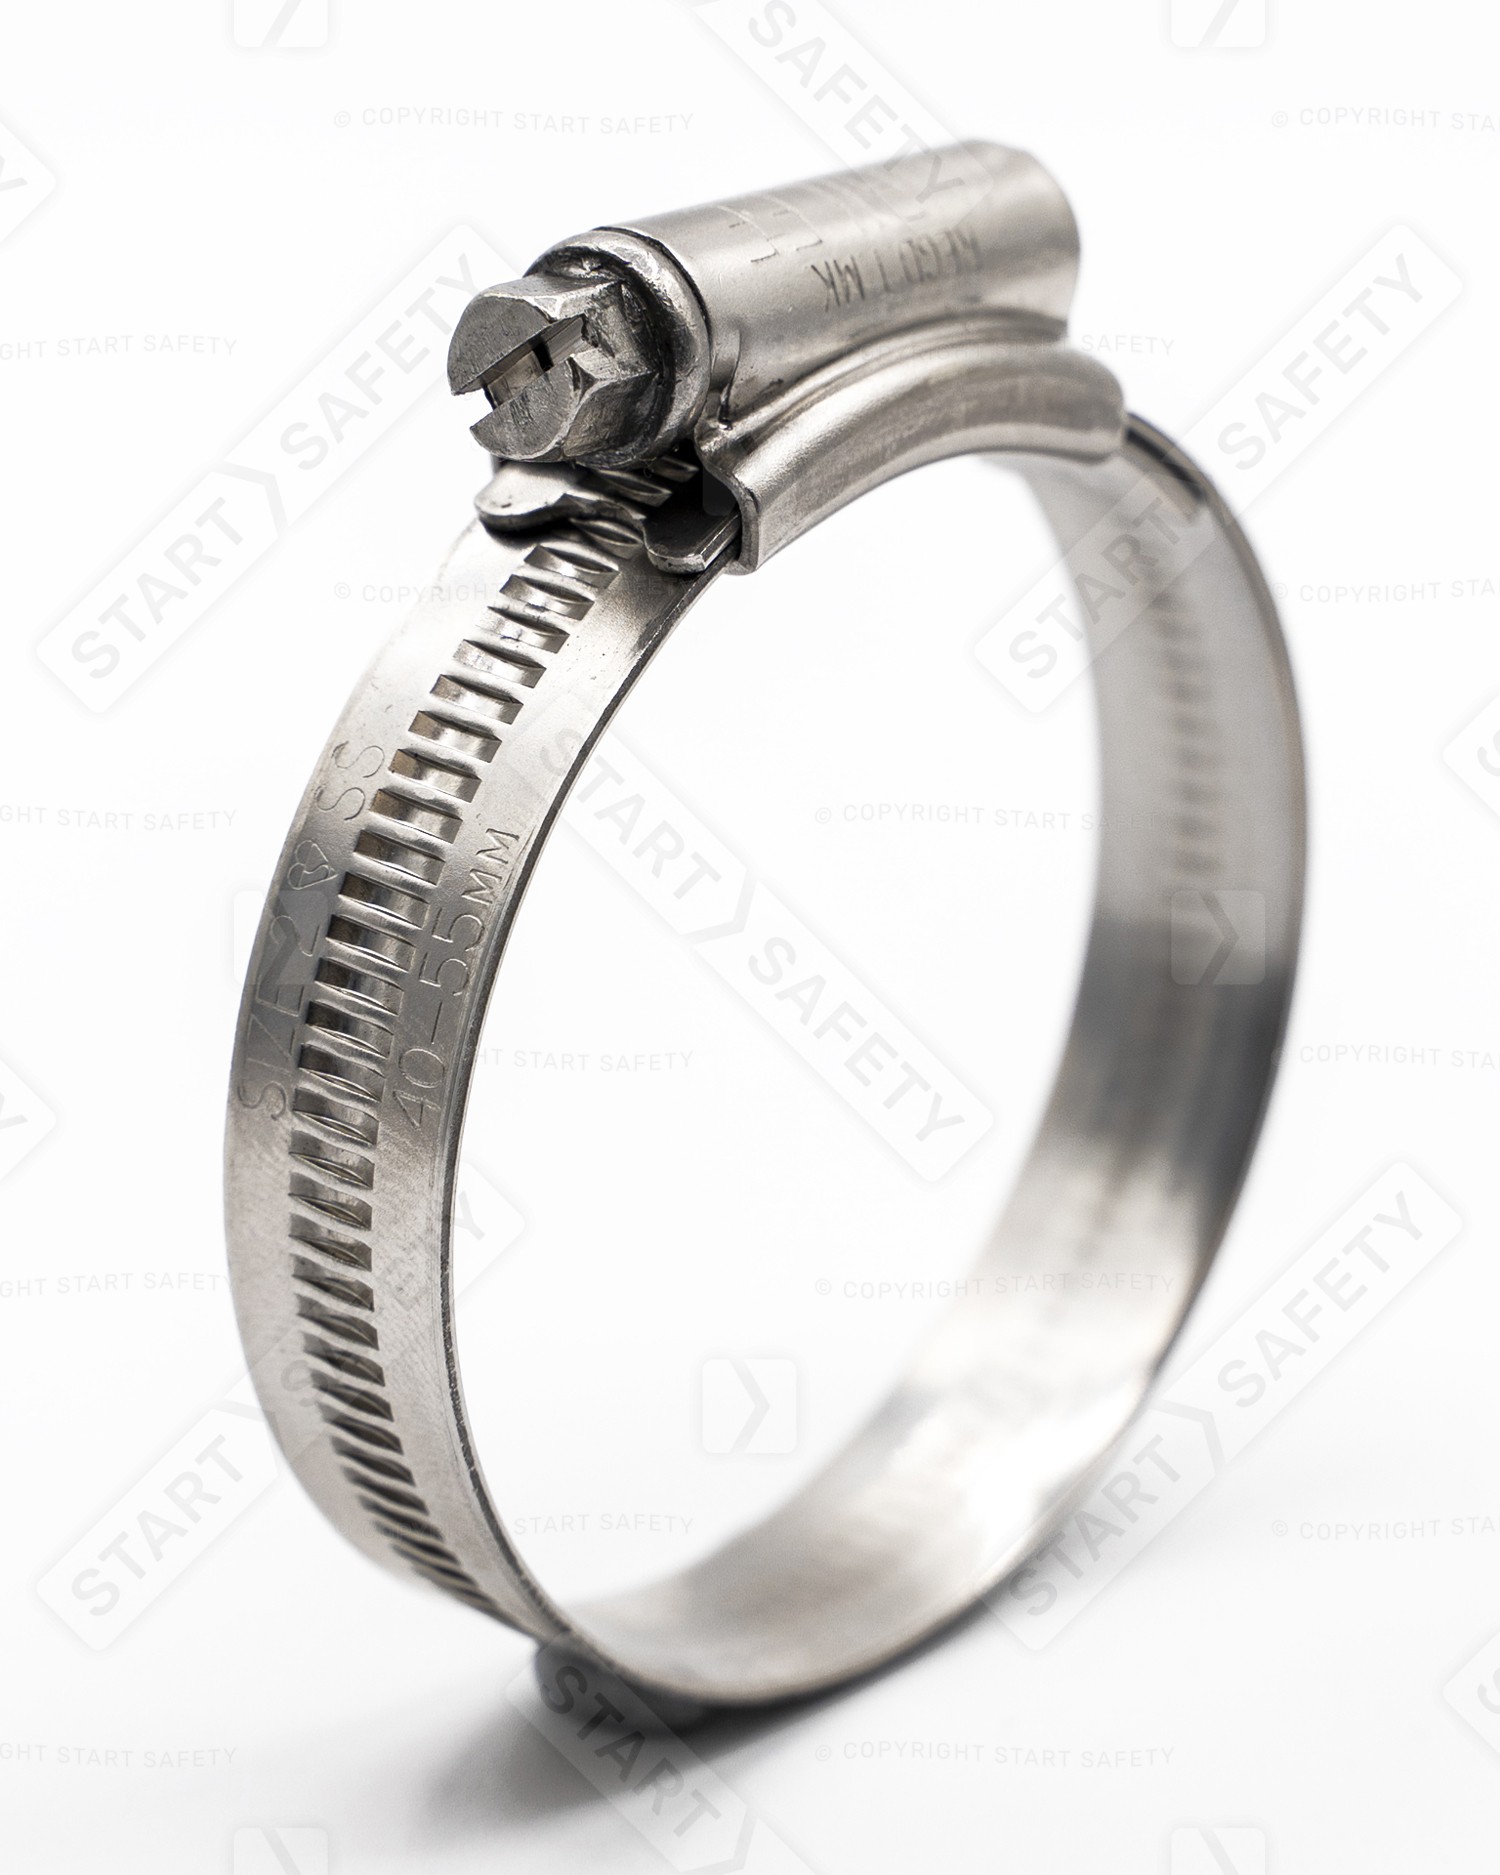 304 grade stainless jubilee hose clip close up